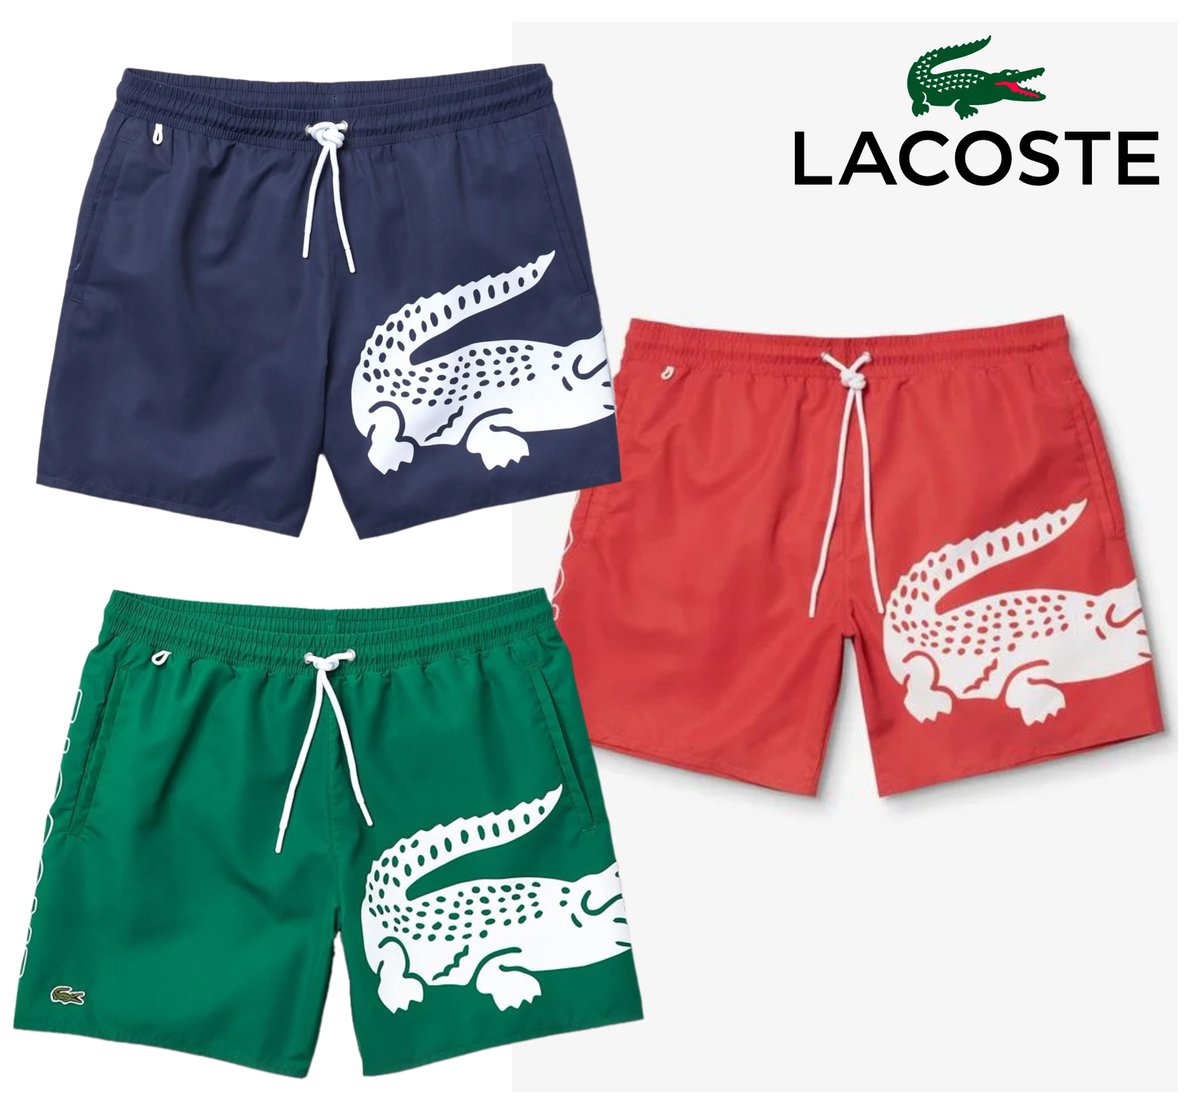 Ad:🐊Lacoste Swim Shorts - Reduced to just £40 Use code MADMAY20 at checkouts 🔗tidd.ly/4b5hrY5 *RRP £85 - Sizes S to XL